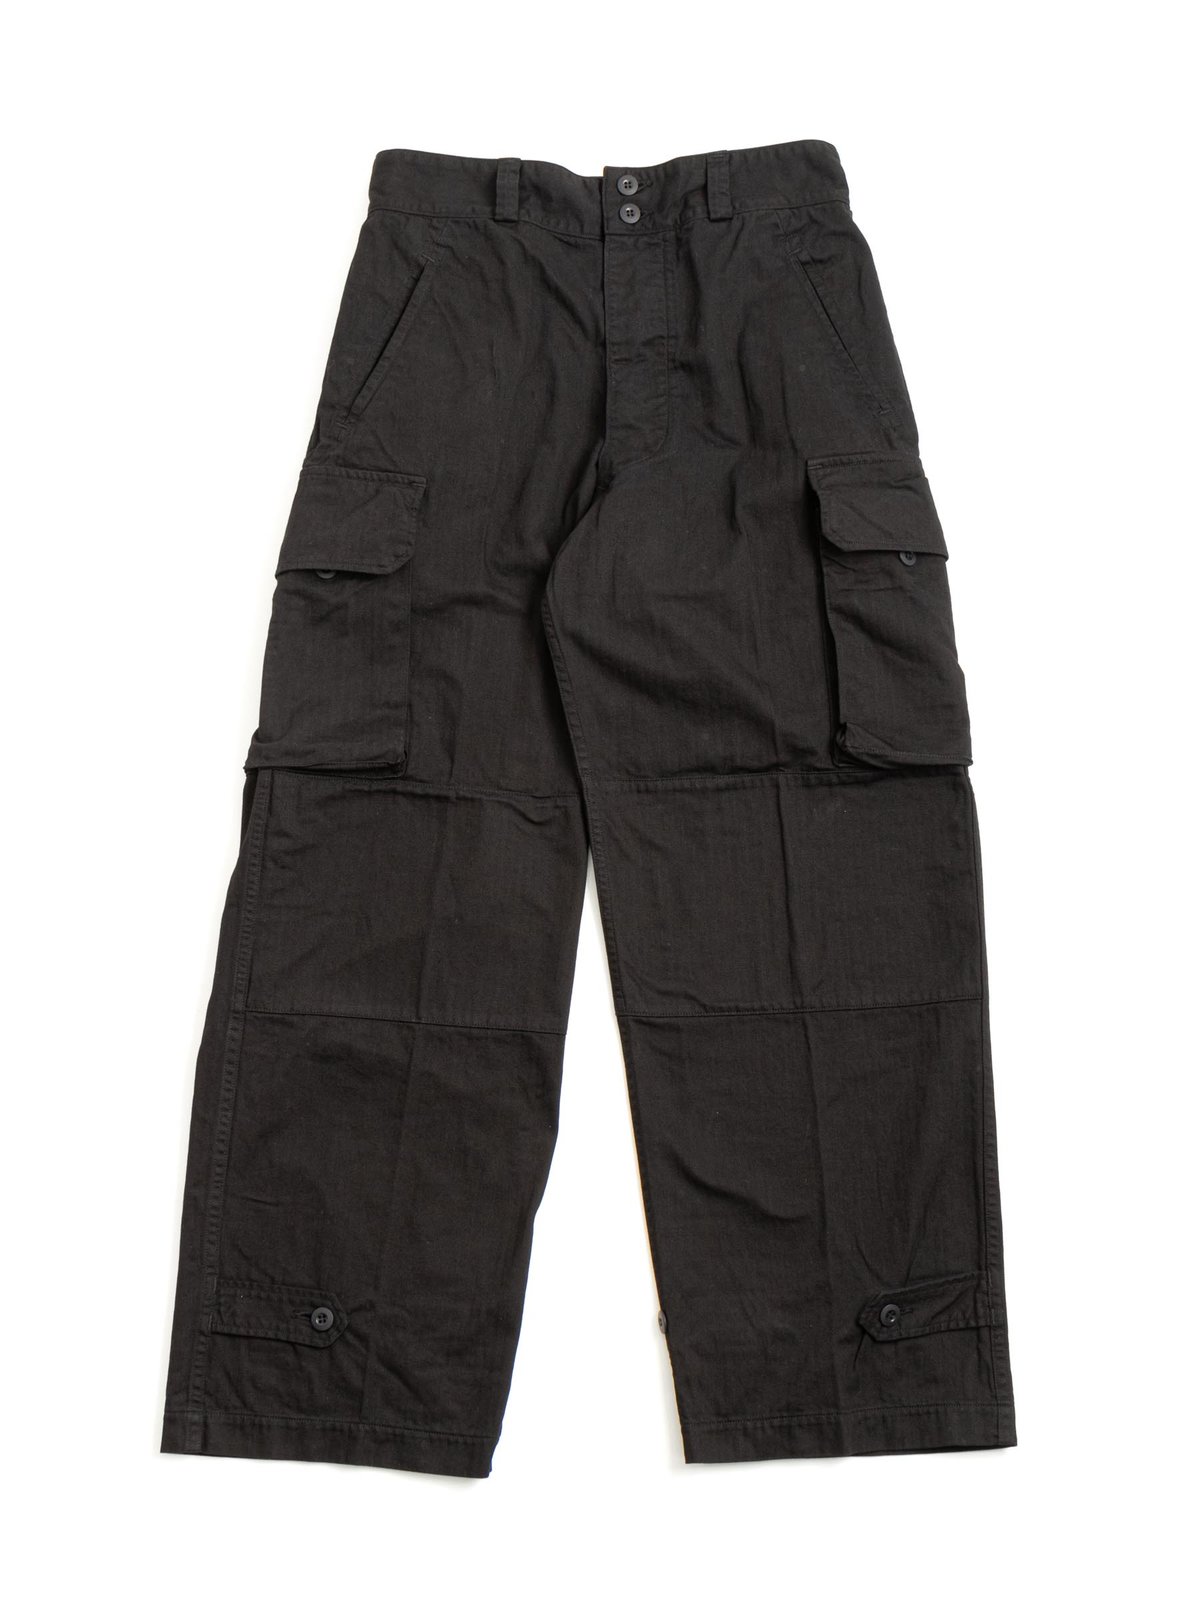 Men's Black Combat Trousers - Free Delivery | Military Kit